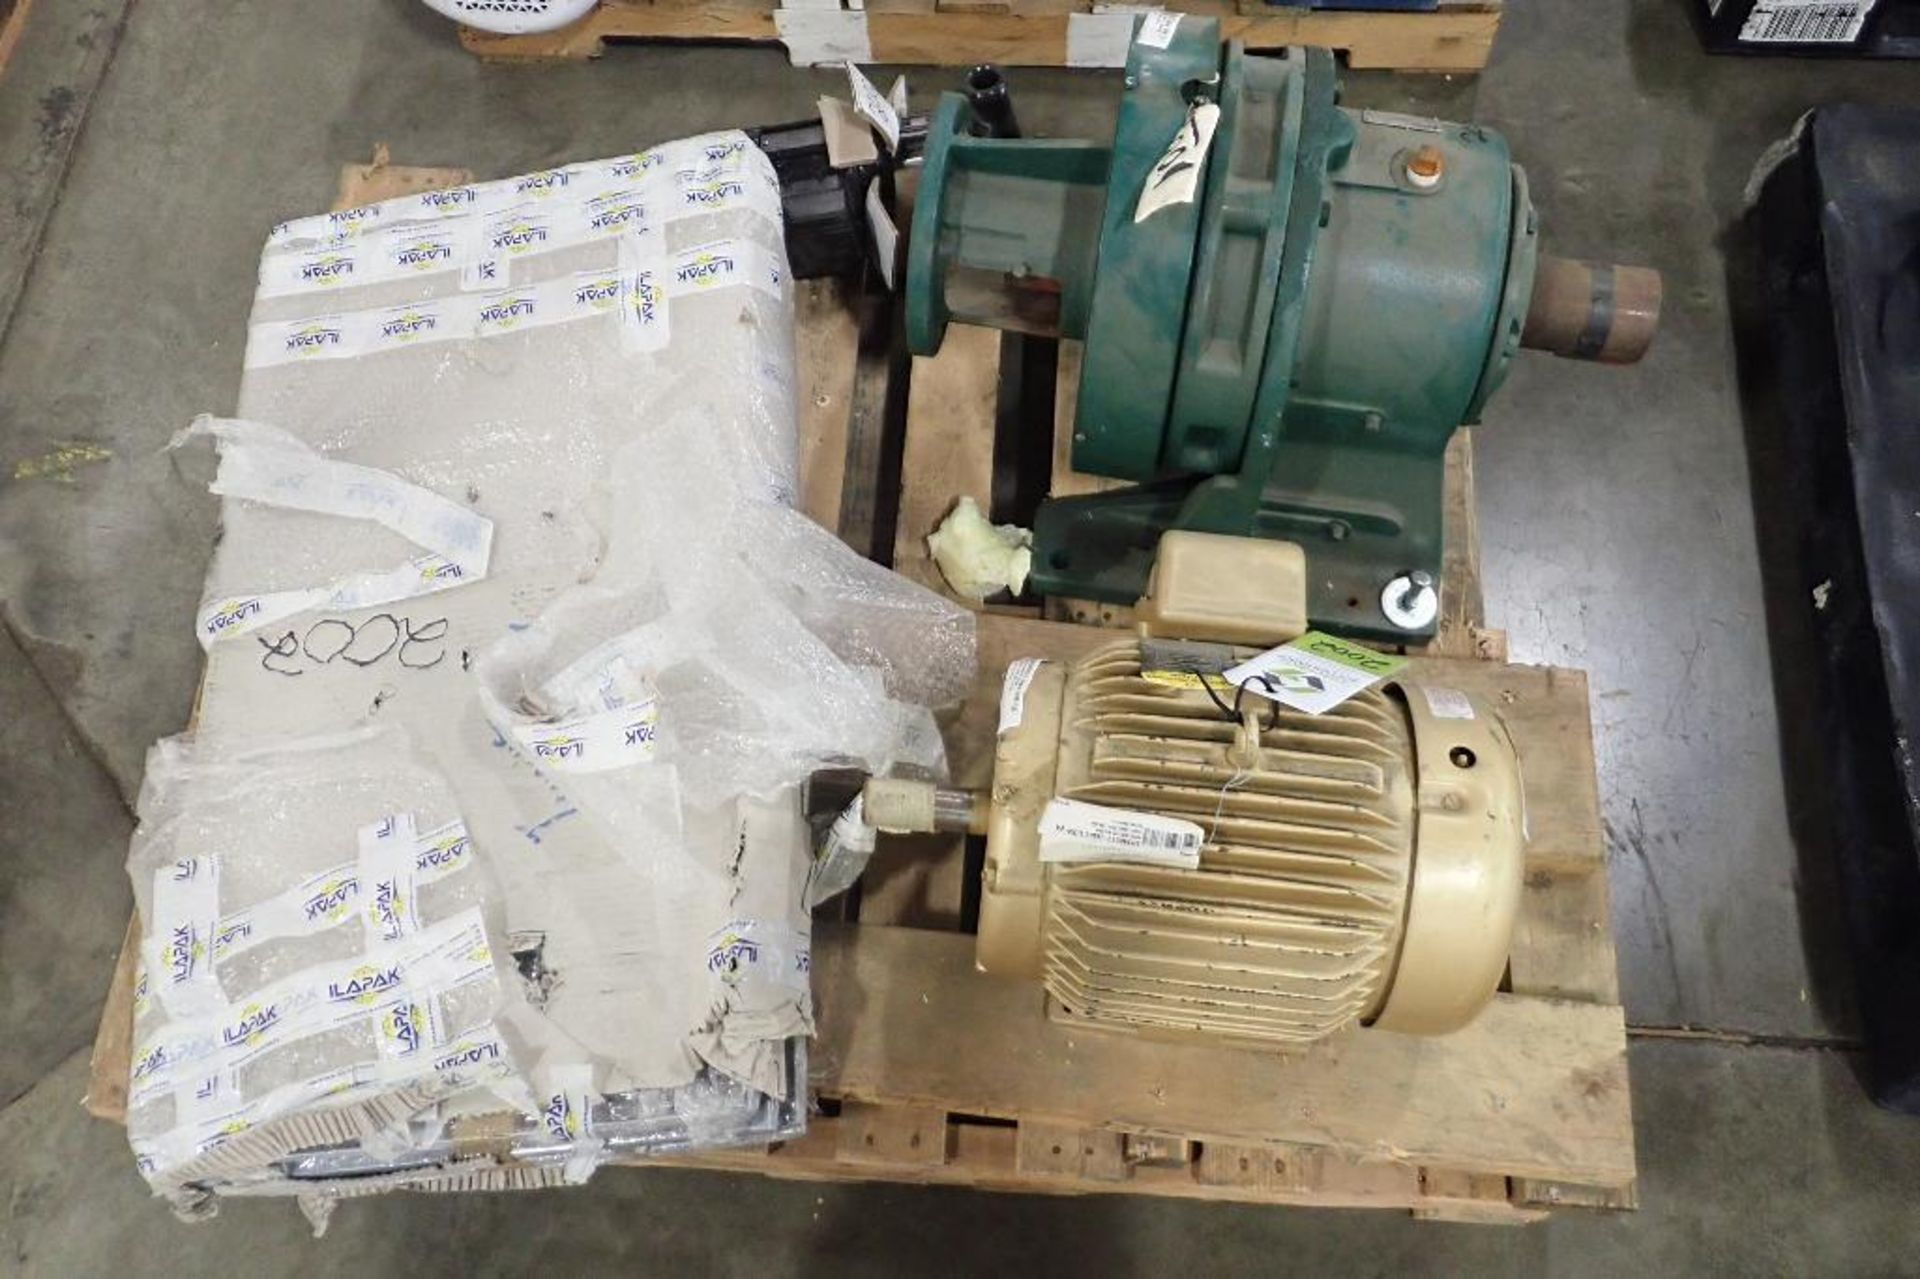 Baldor 7.5 hp electric motor, Sm-Cylco gear reducer, Grundfos pump, Ilapak covers. (See photos for a